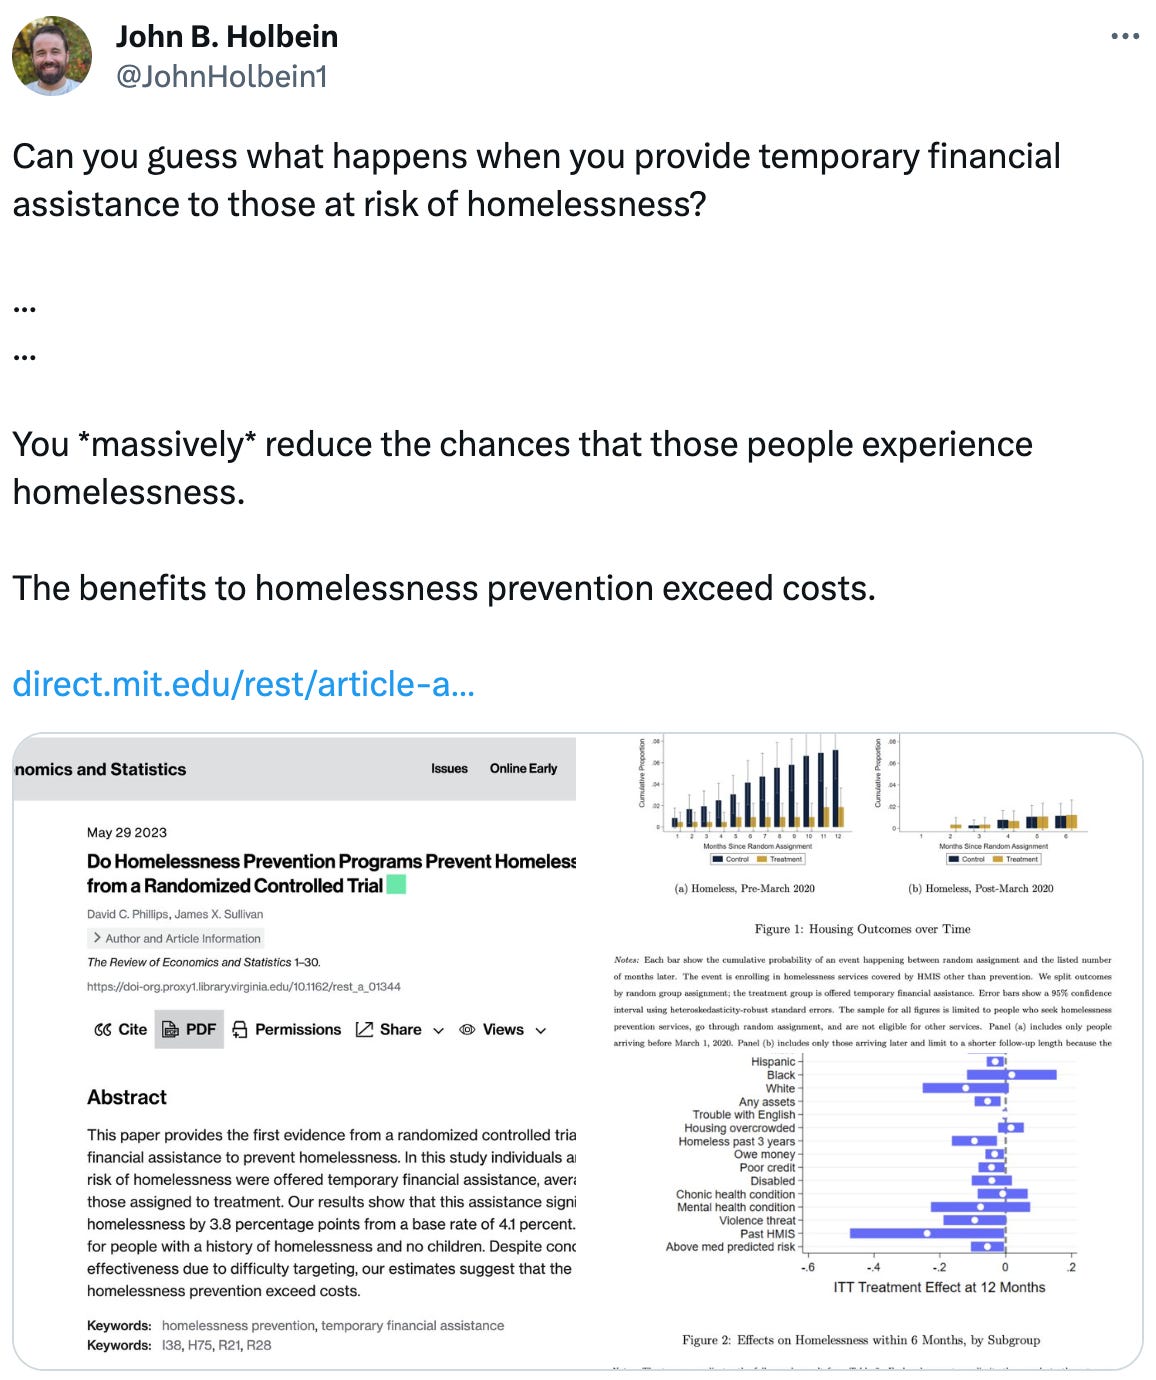  See new Tweets Conversation John B. Holbein @JohnHolbein1 Can you guess what happens when you provide temporary financial assistance to those at risk of homelessness?  ... ...  You *massively* reduce the chances that those people experience homelessness.  The benefits to homelessness prevention exceed costs.  https://direct.mit.edu/rest/article-abstract/doi/10.1162/rest_a_01344/116185/Do-Homelessness-Prevention-Programs-Prevent?redirectedFrom=fulltext